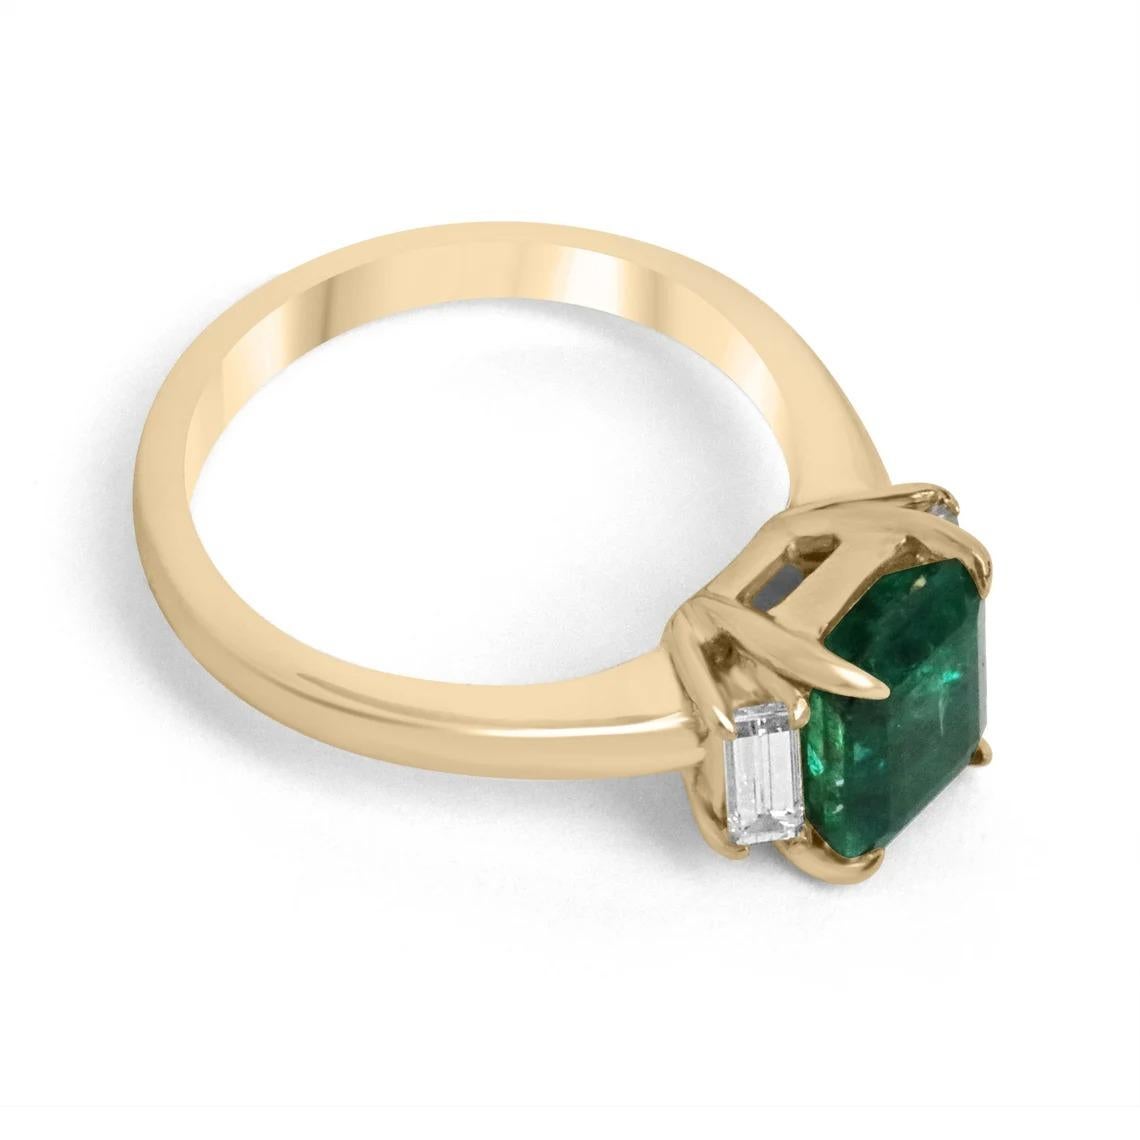 Featured is a stunning natural emerald and diamond, three-stone ring. A full 2.09 carats of pure, natural, Zambian beauty! This emerald displays a gorgeous, deep dark green color, with very good luster. Complimenting the center stone are two